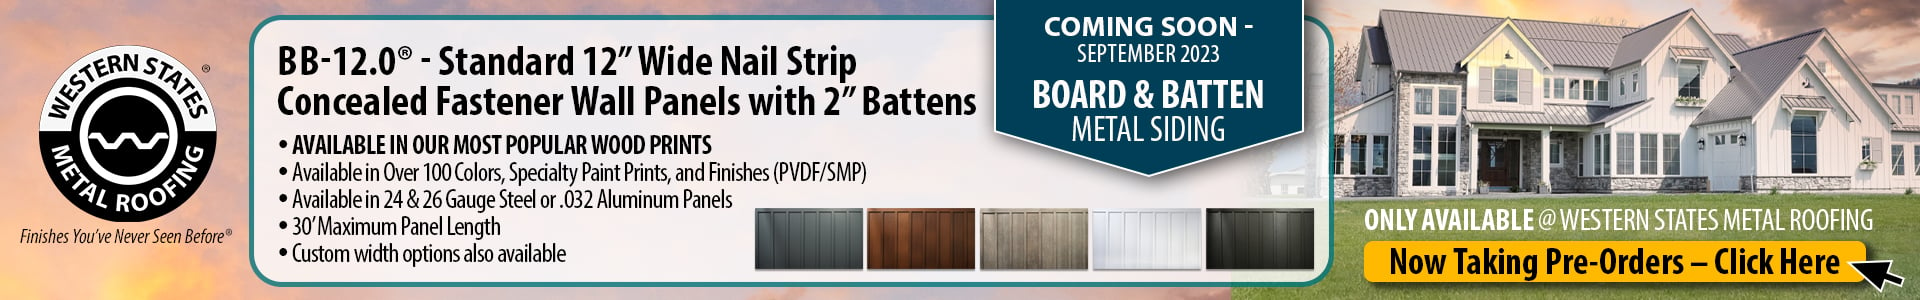 6029-22-Board-and-Batten-Promo-Banner_1920x300